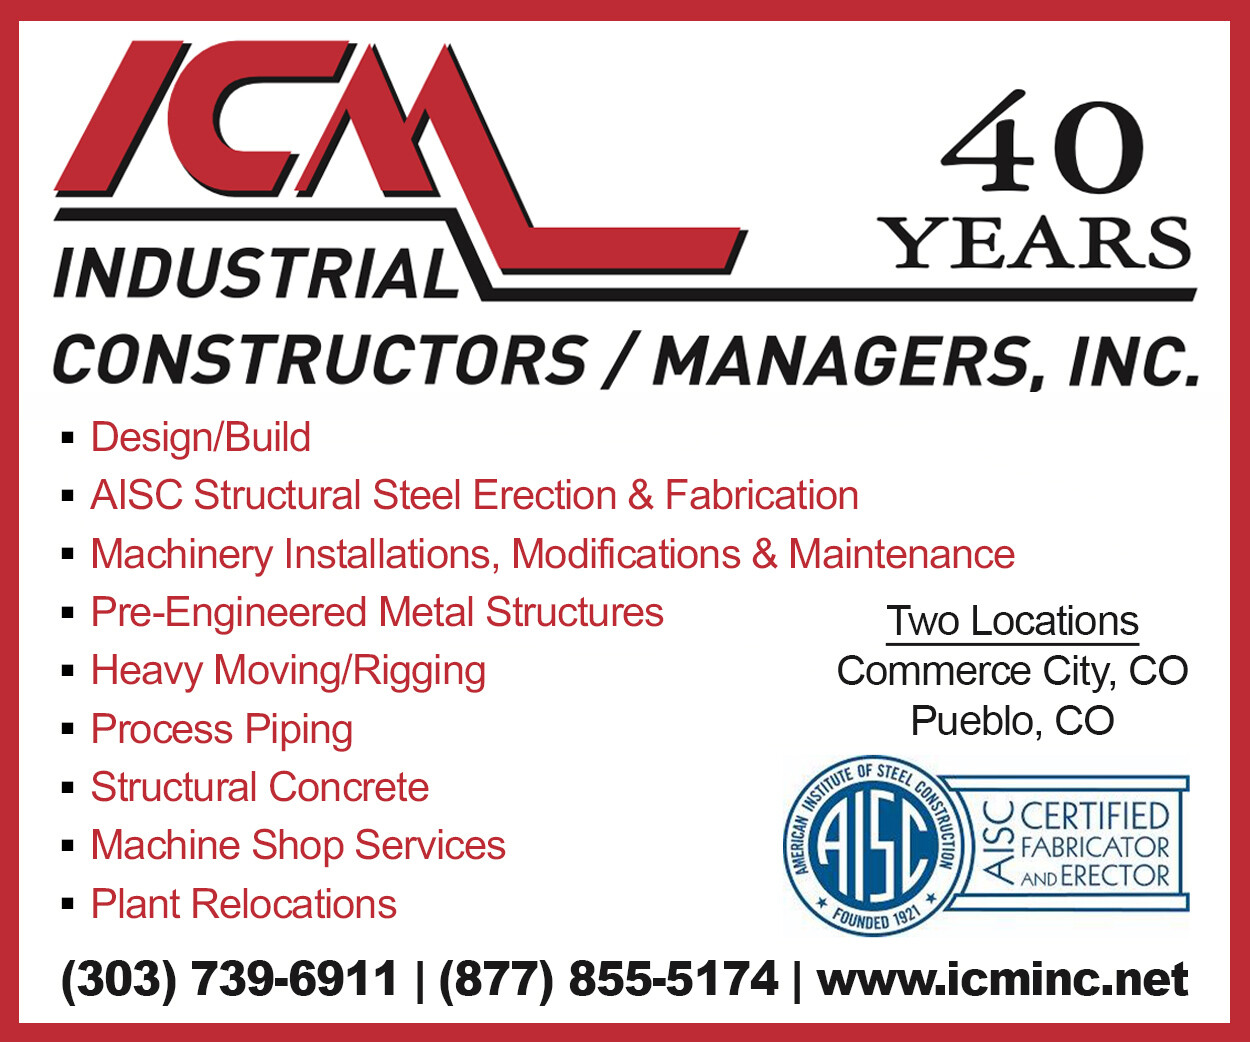 Industrial Constructors and Managers - ICM